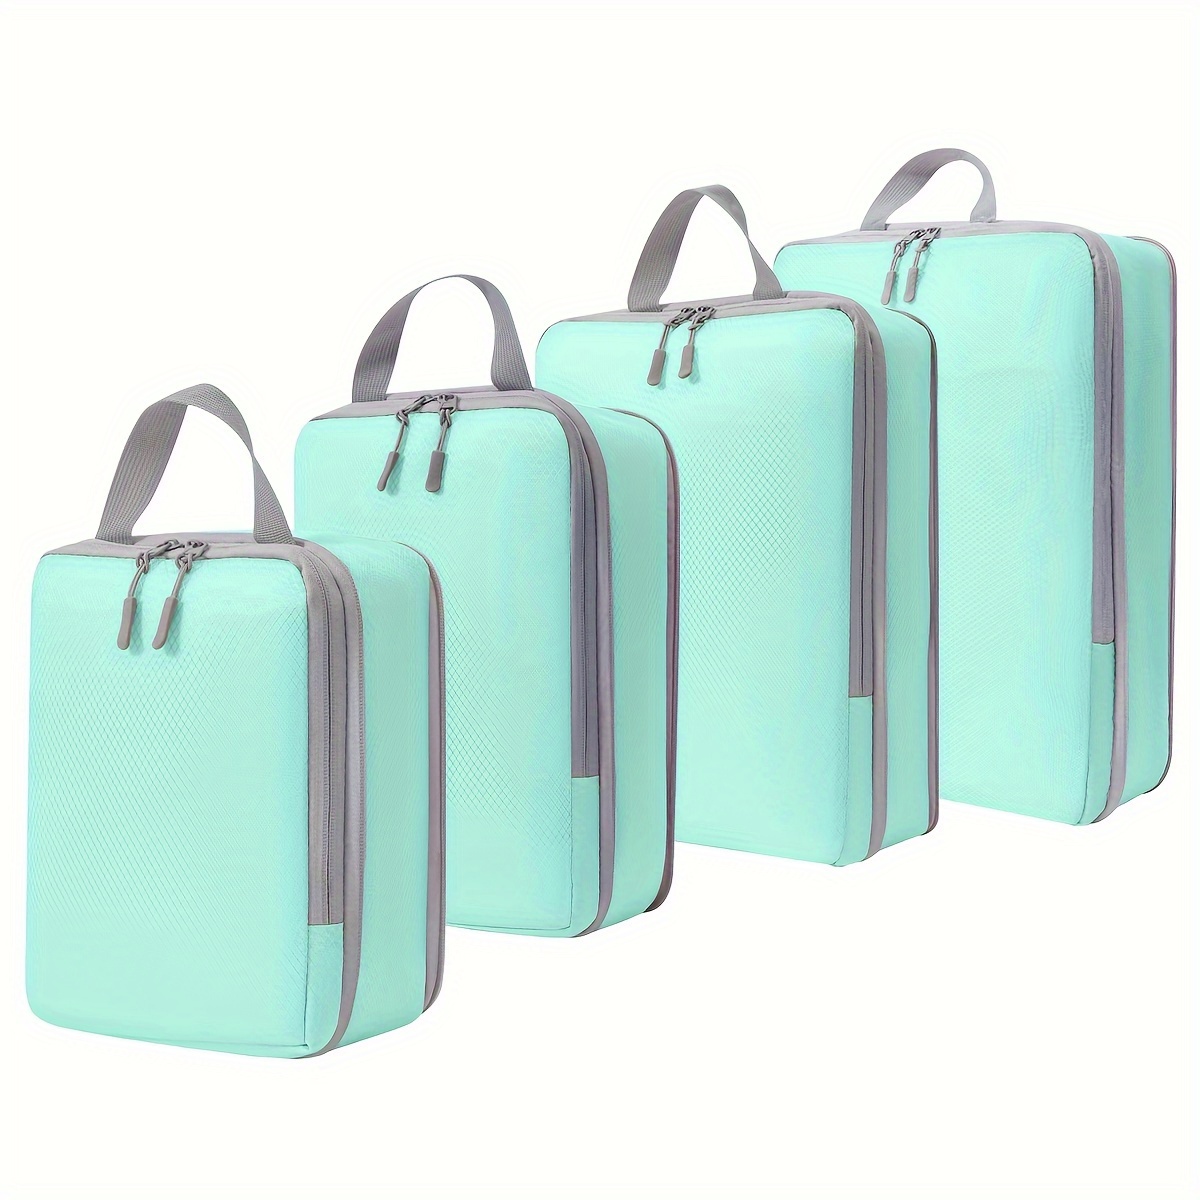 

4pcs Compression Luggage Packing Organizer Set, Lightweight Handheld Packing Cubes, Clothing Underwear Shoes Storage Bags For Travel Use